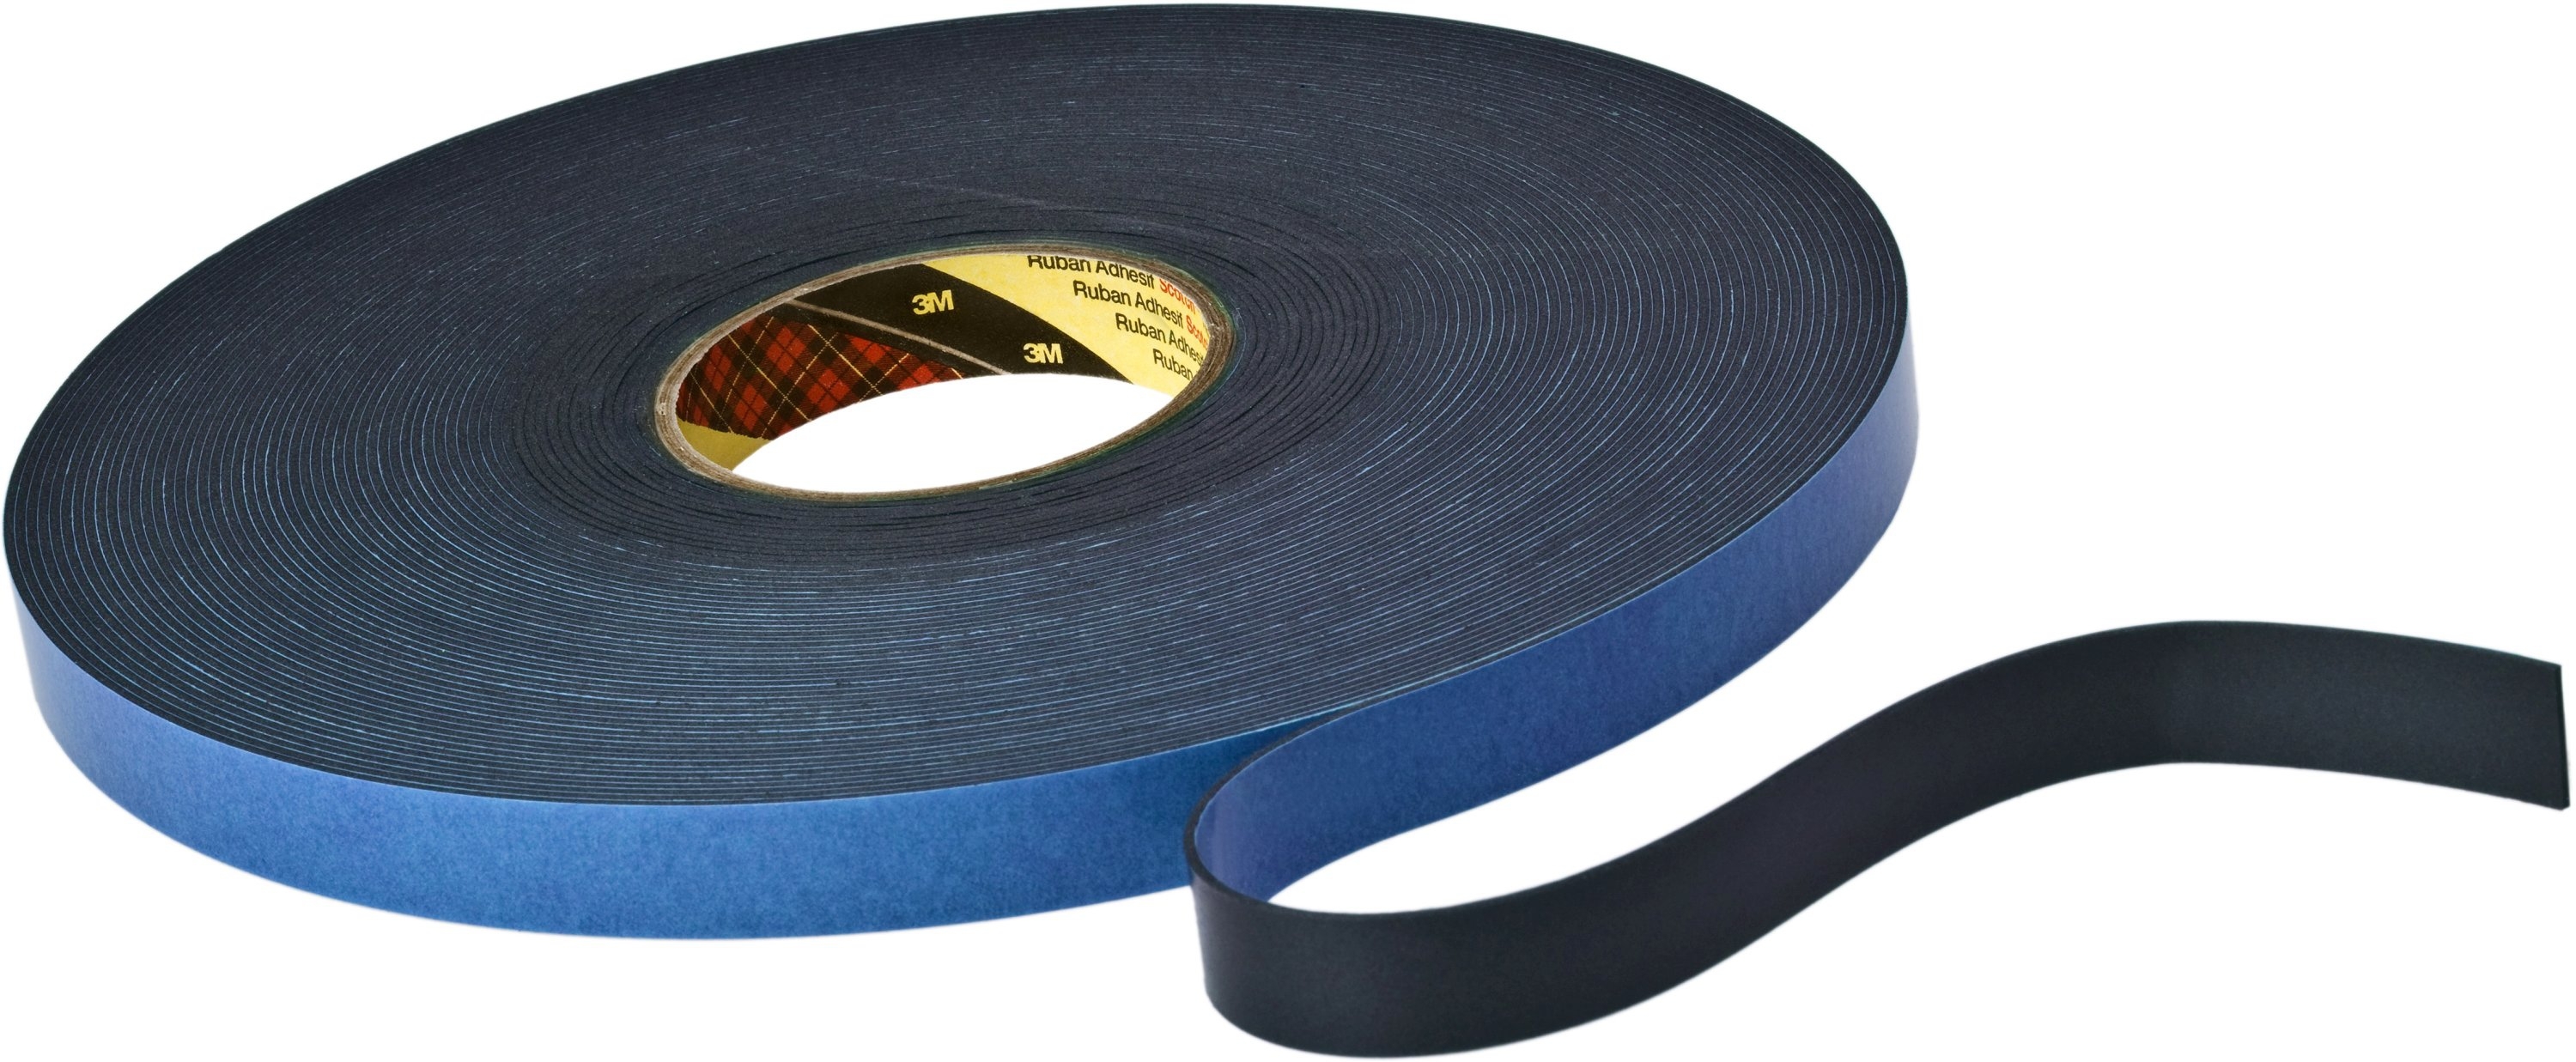 3M Double-sided PE foam tape with acrylic adhesive 9508B, black, 19 mm x 66 m, 0.8 mm